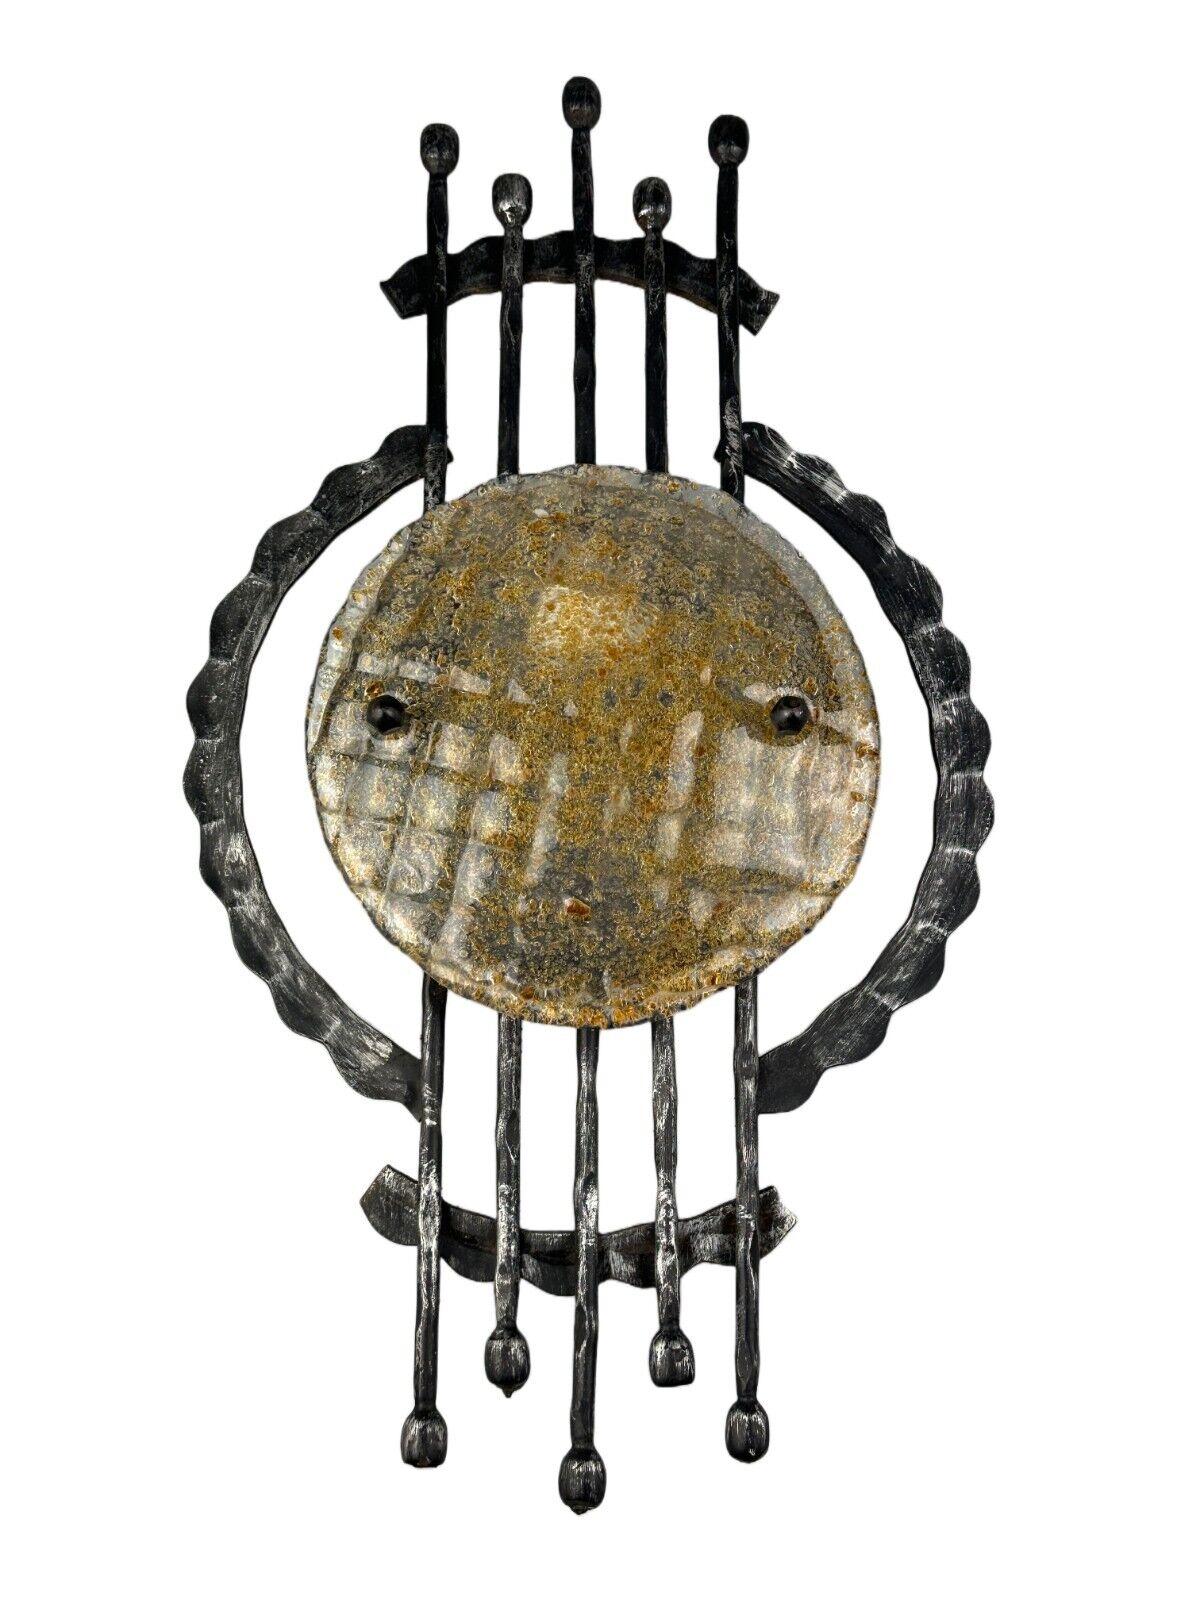 60s 70s Brutalist Wall Lamp Sconce Iron & Glass Wall Sconce Design

Object: wall lamp

Manufacturer:

Condition: good

Age: around 1960-1970

Dimensions:

Height = 53cm
Width = 30cm
Depth = 11.5cm

Material: glass, iron

Other notes:

E27